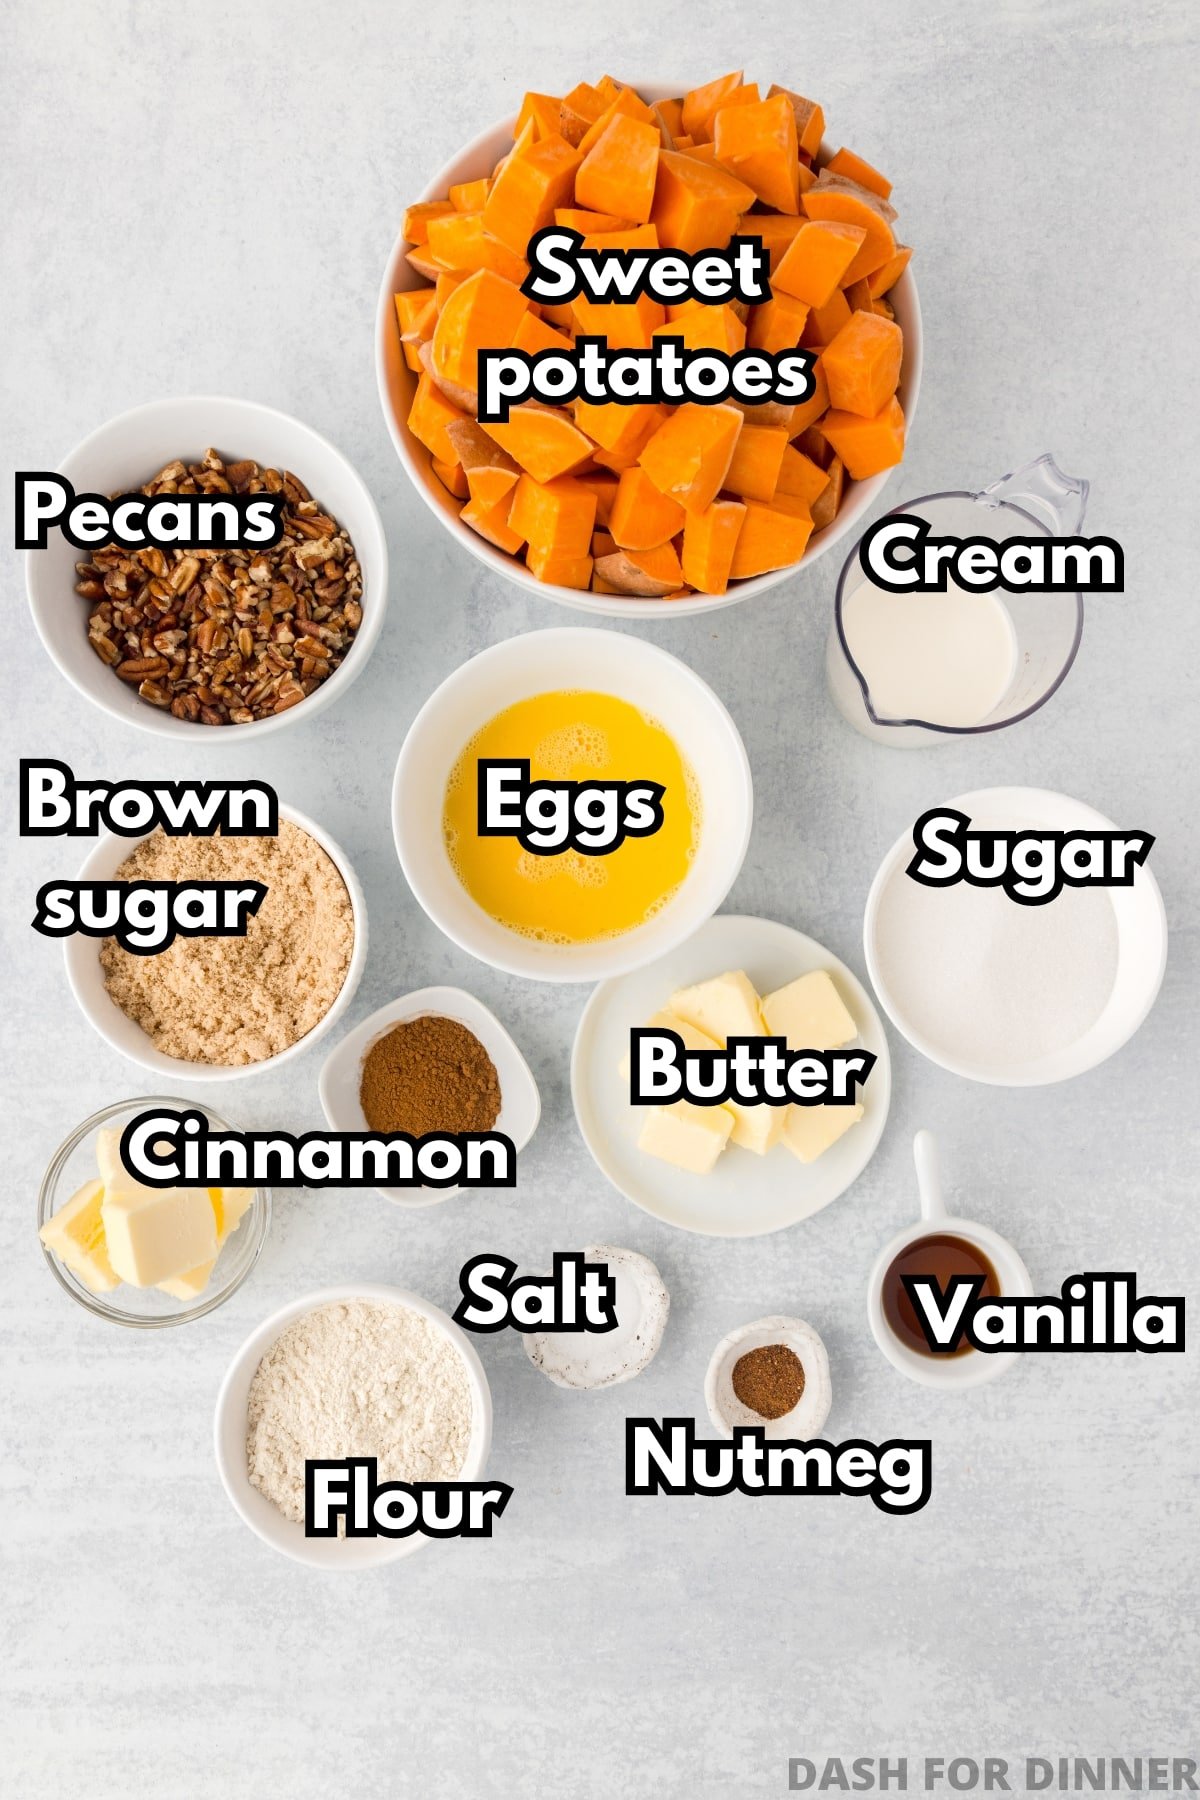 The ingredients needed to make sweet potato casserole, including butter, eggs, brown sugar, pecans, and cream.